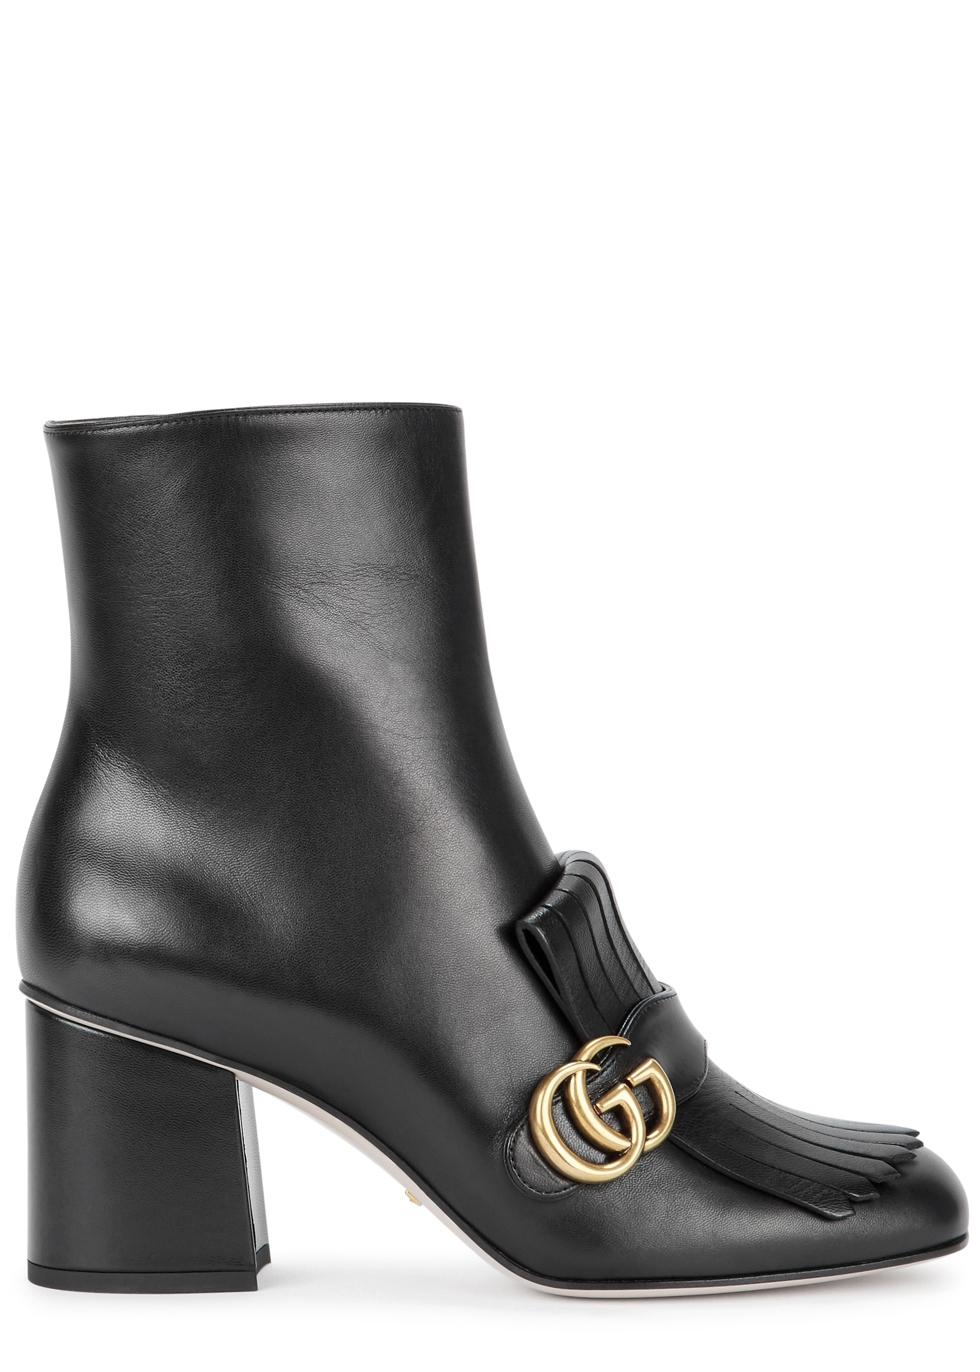 Gucci Marmont GG Suede Ankle Boots in Black | Lyst